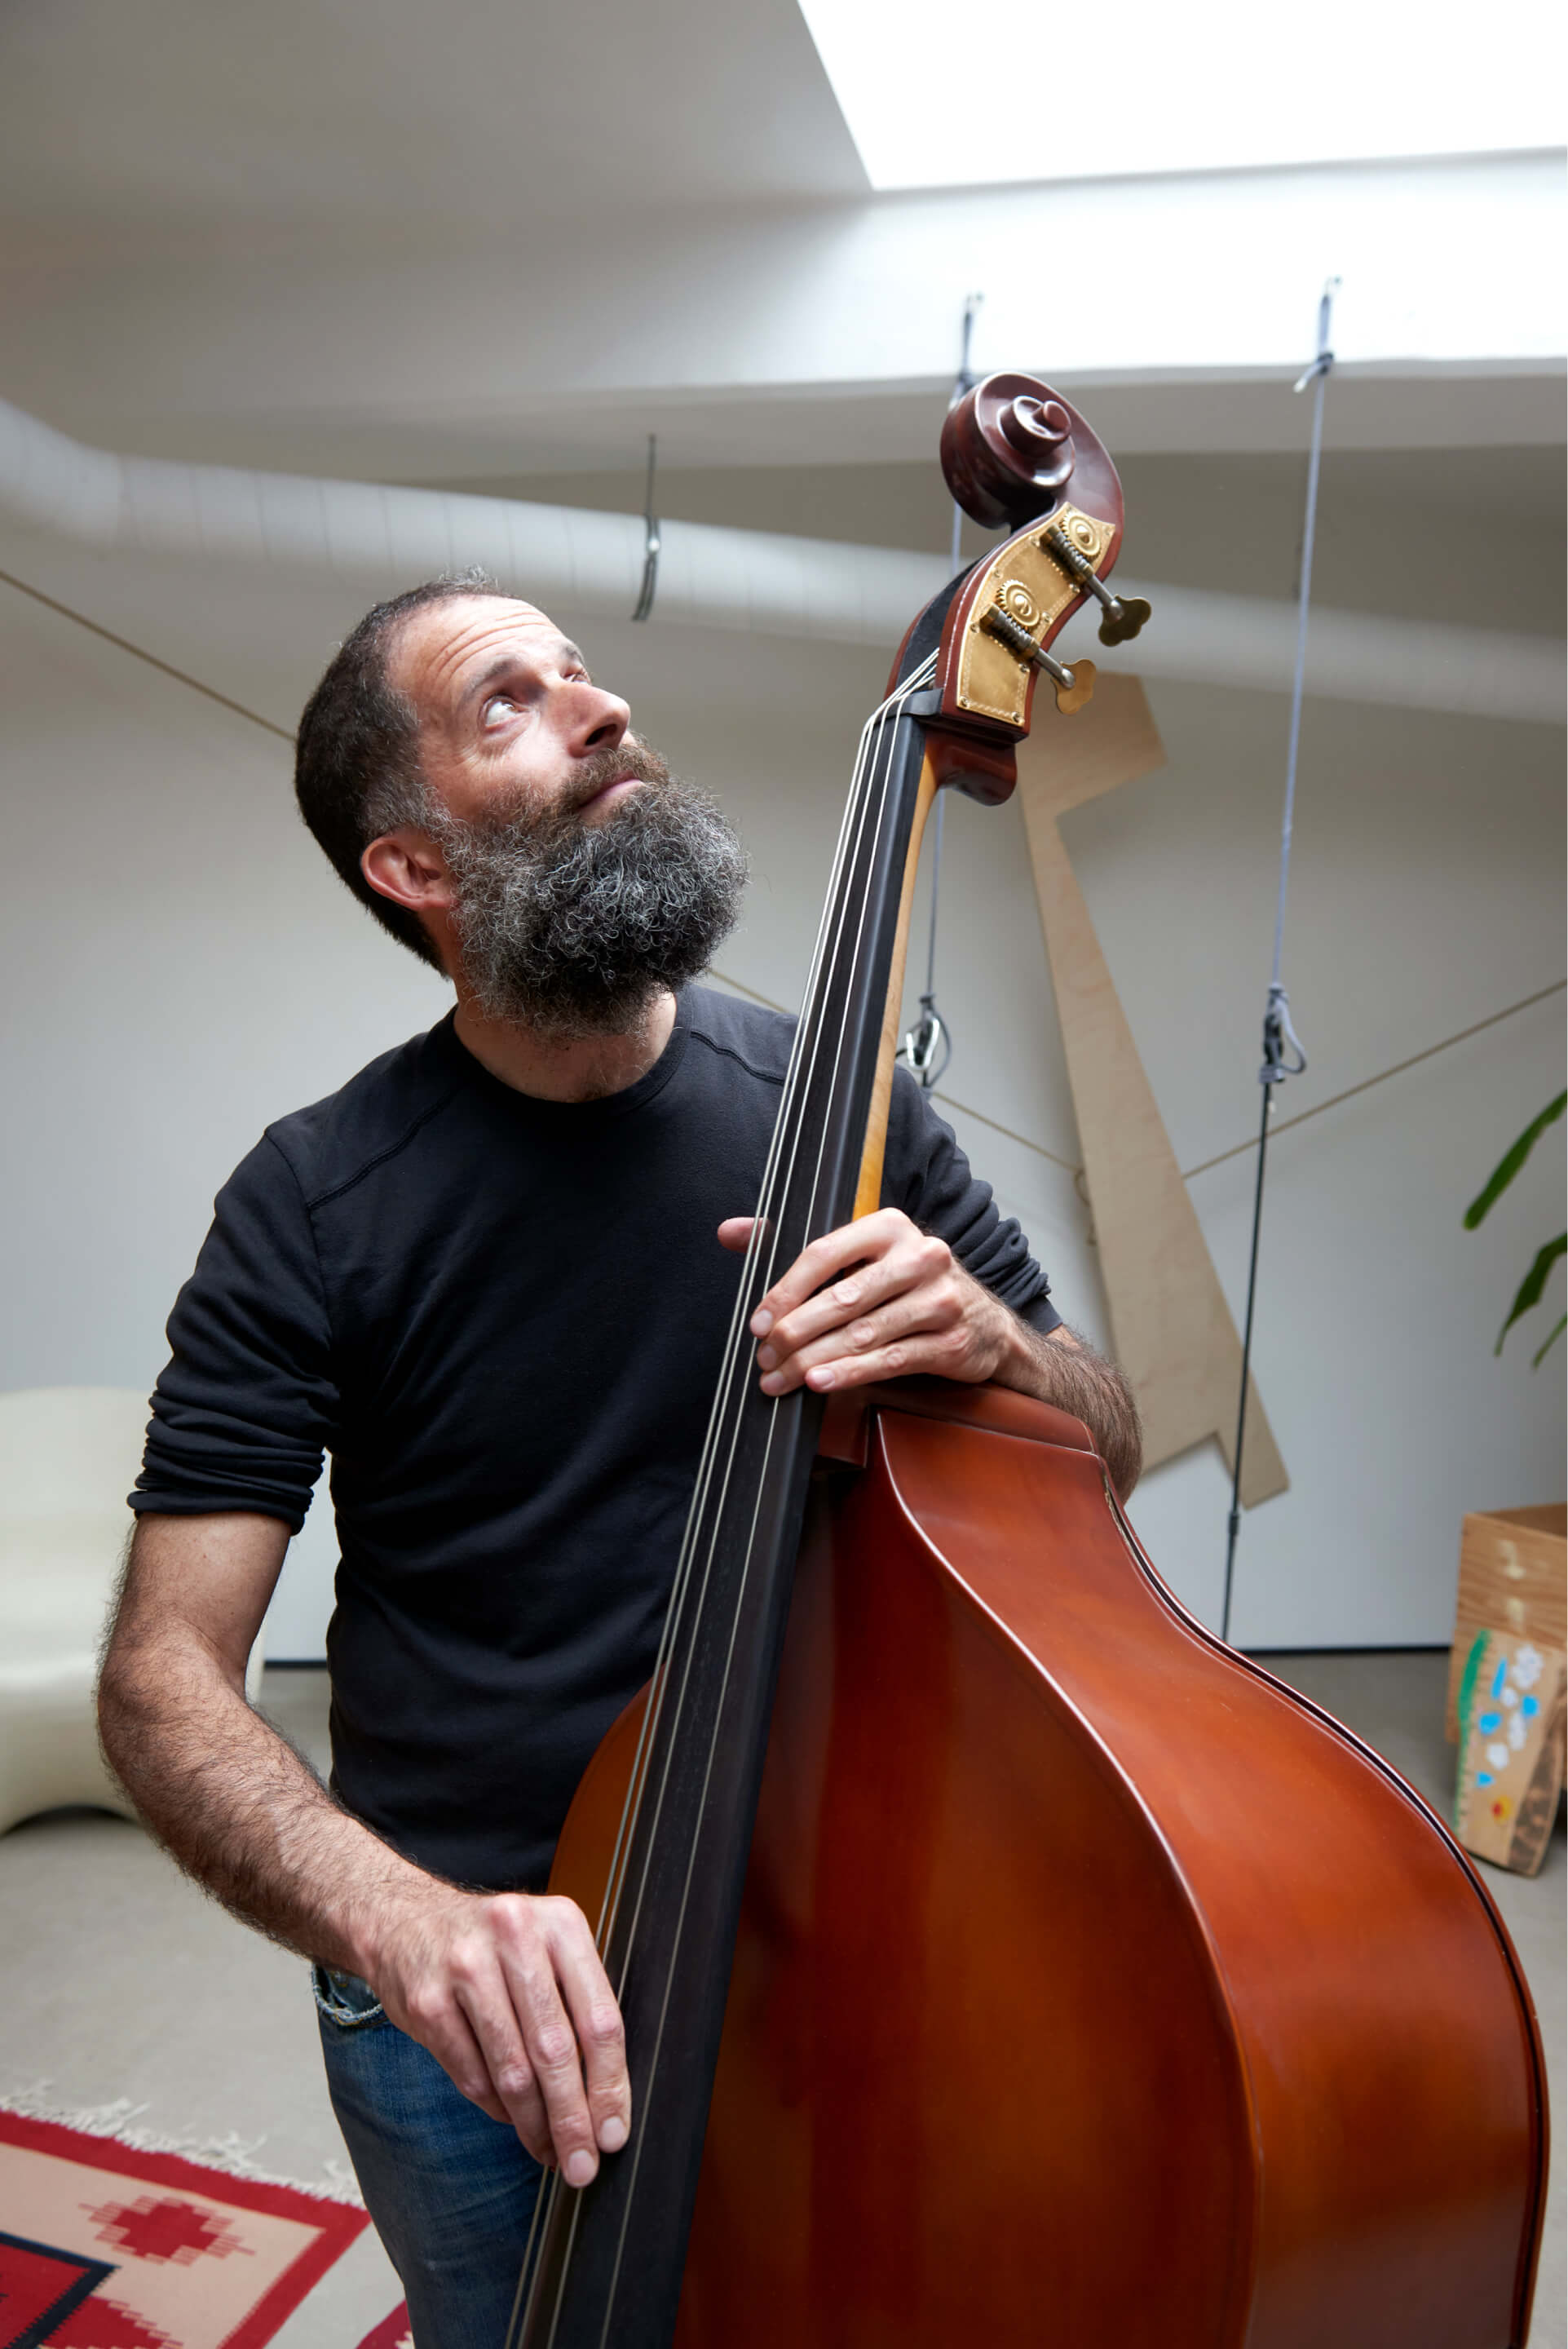 Man playing on a contrabass looking up to a roof window